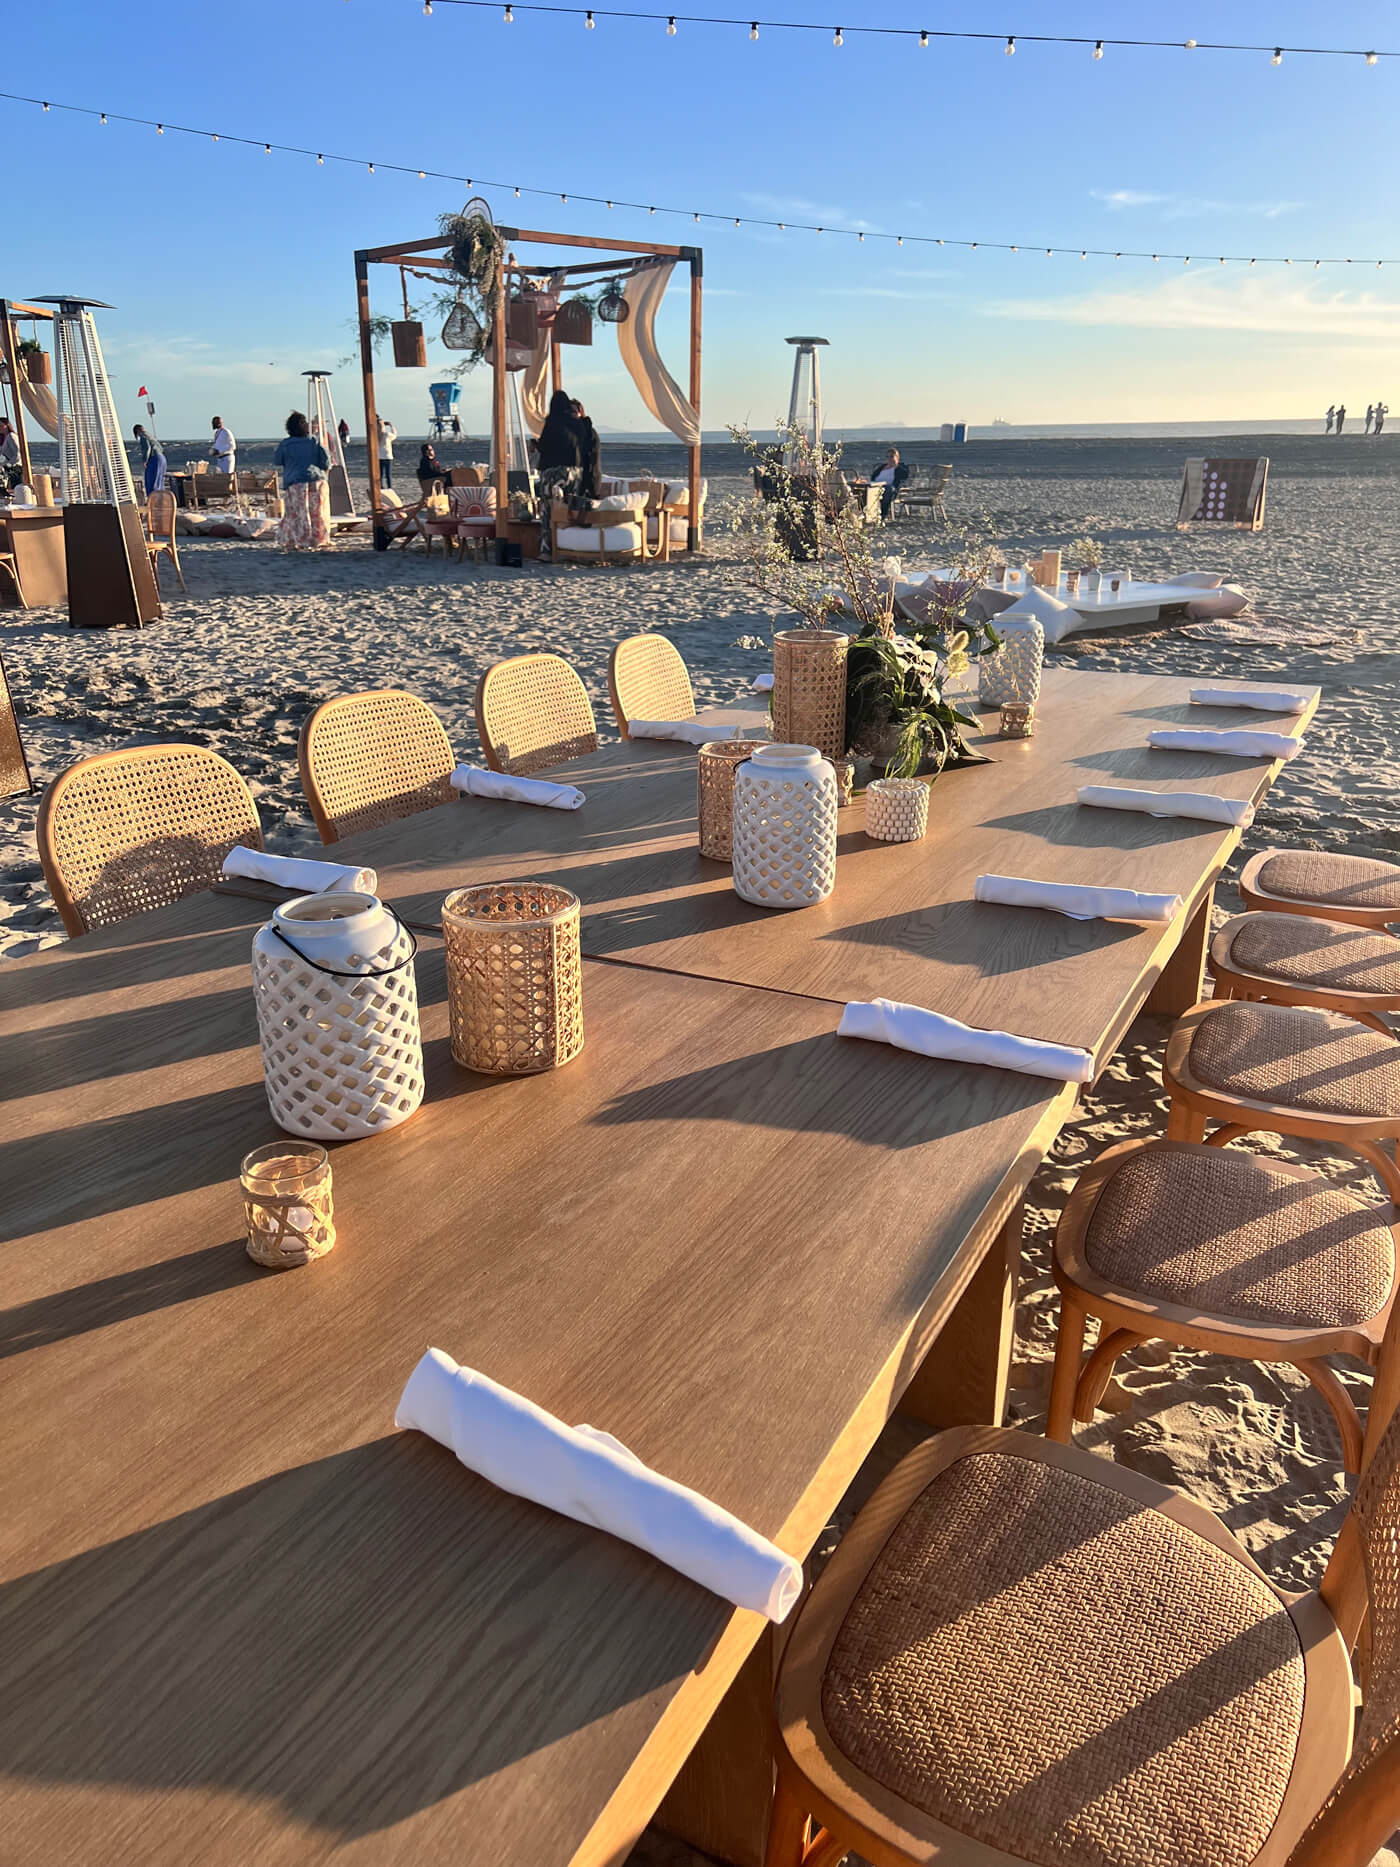 Hosts Global | Southern California event on the beach